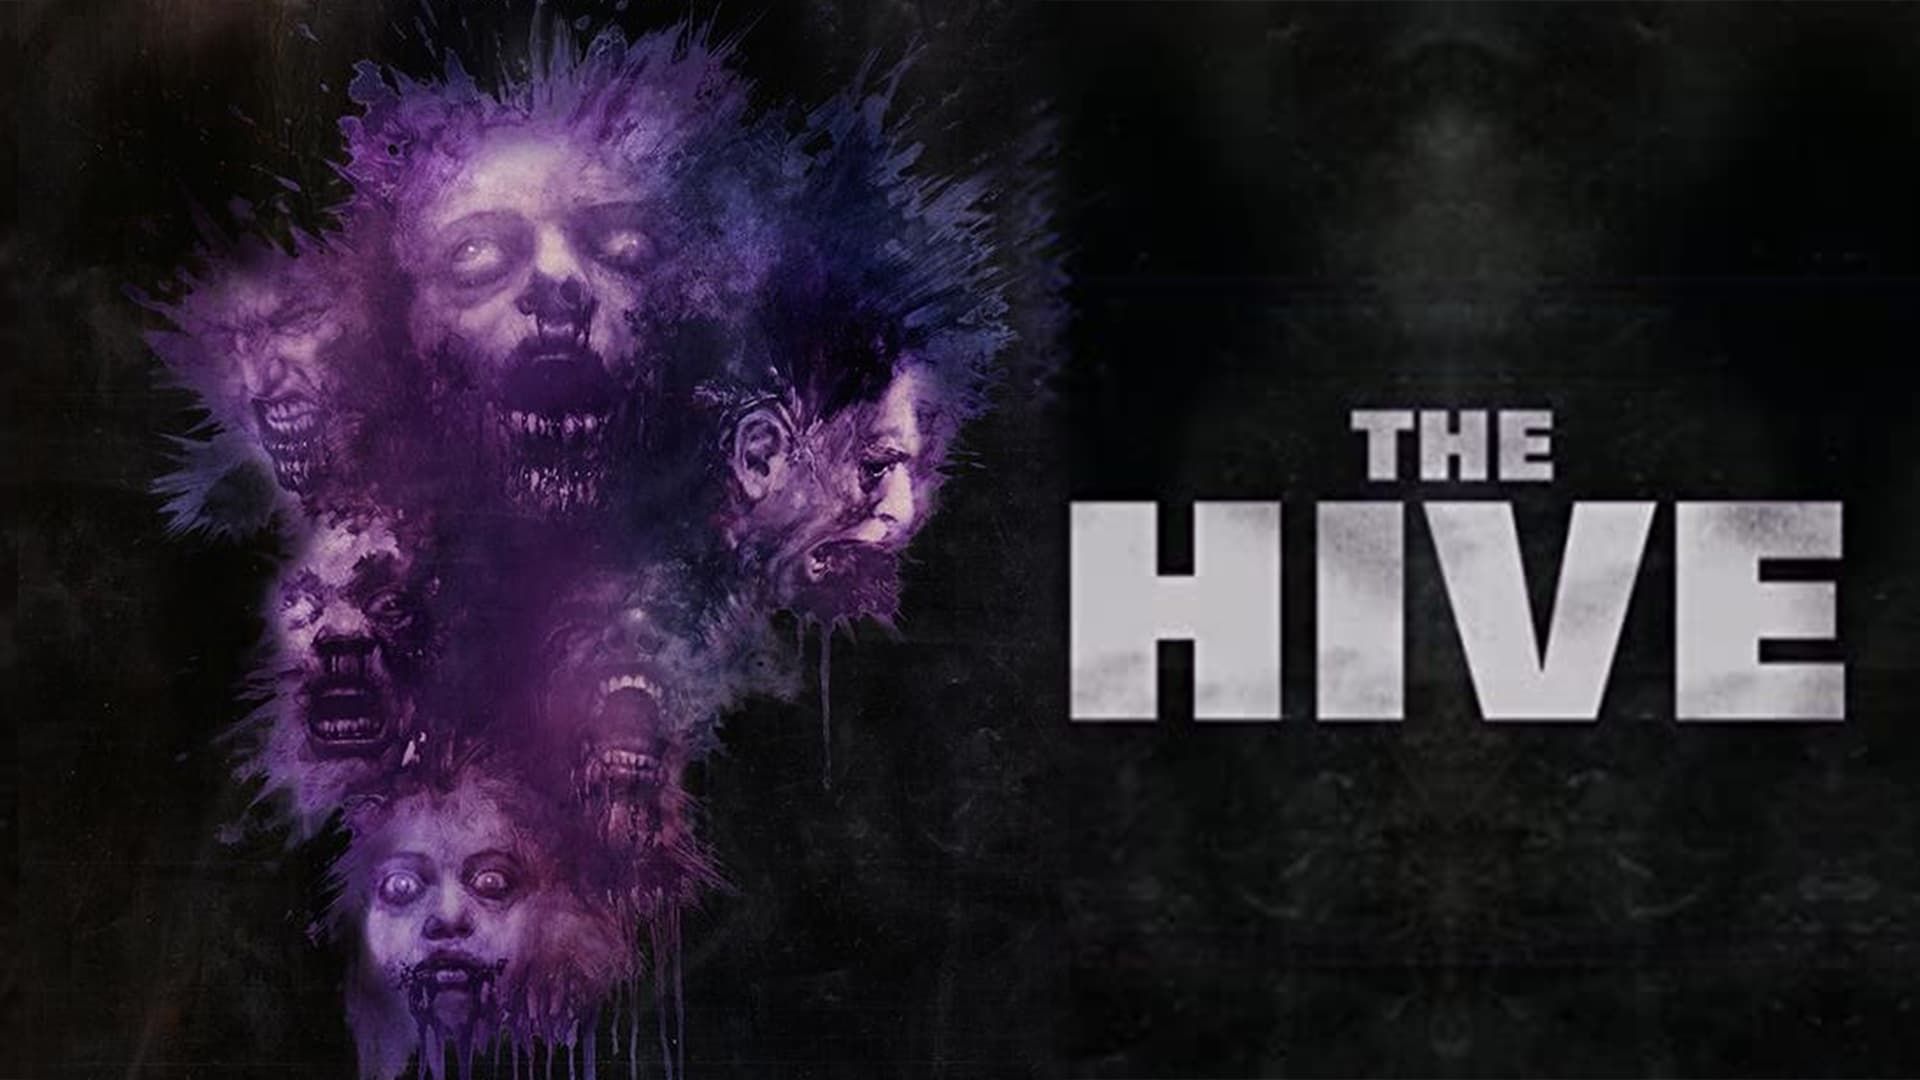 The Hive background